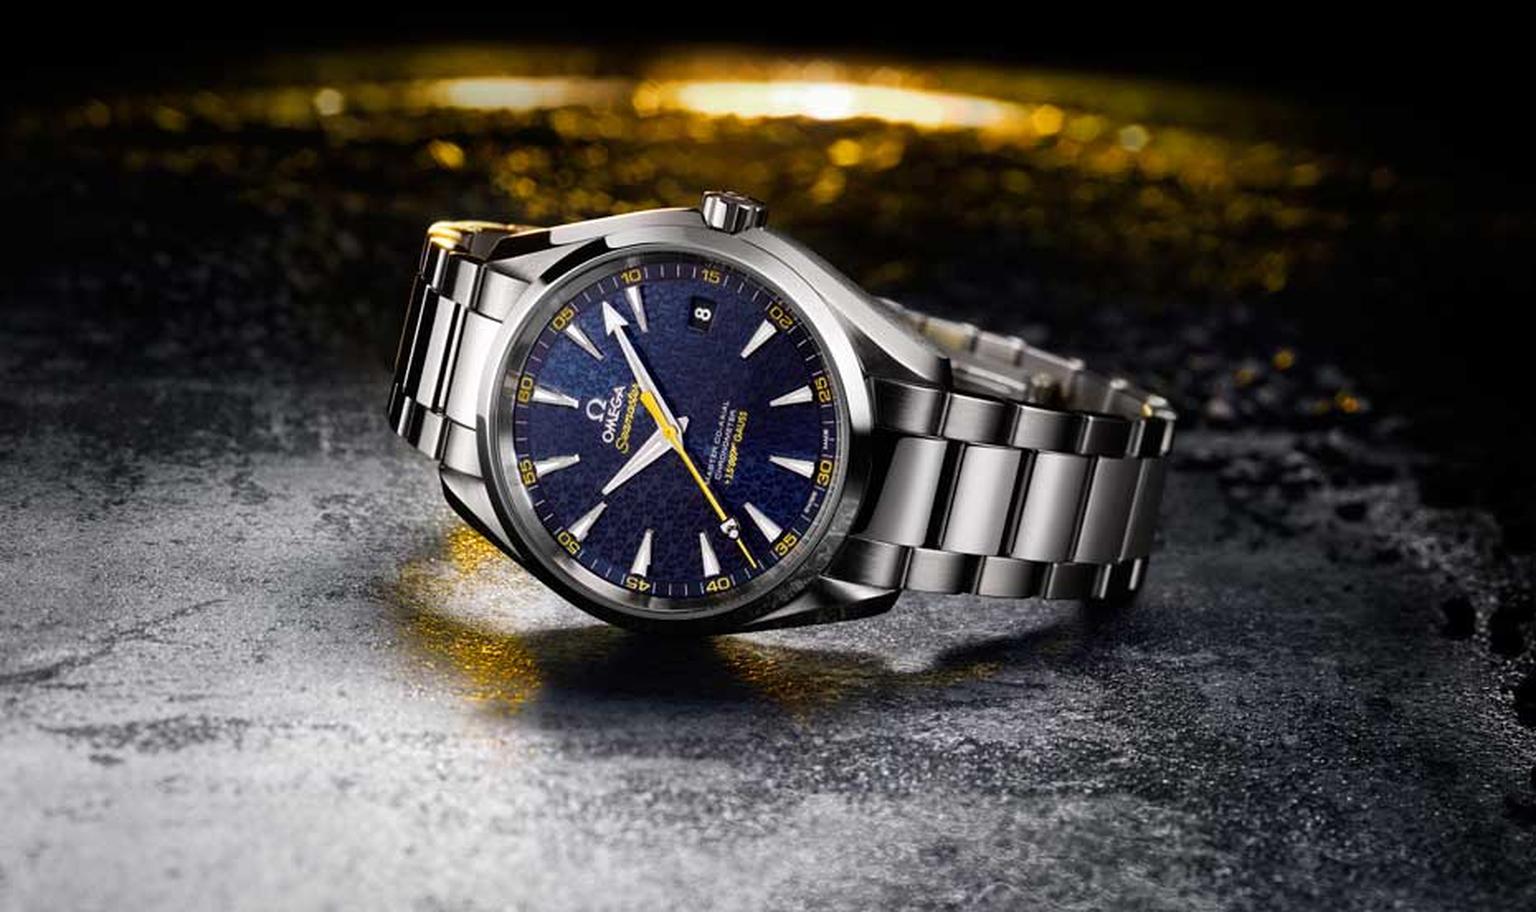 The Omega Seamaster Aqua Terra 150M is the official James Bond watch for the upcoming film Spectre. The 41.5mm stainless steel case provides a rugged companion for Bond's most challenging adventures and features a new Master Co-Axial calibre 8507, an auto